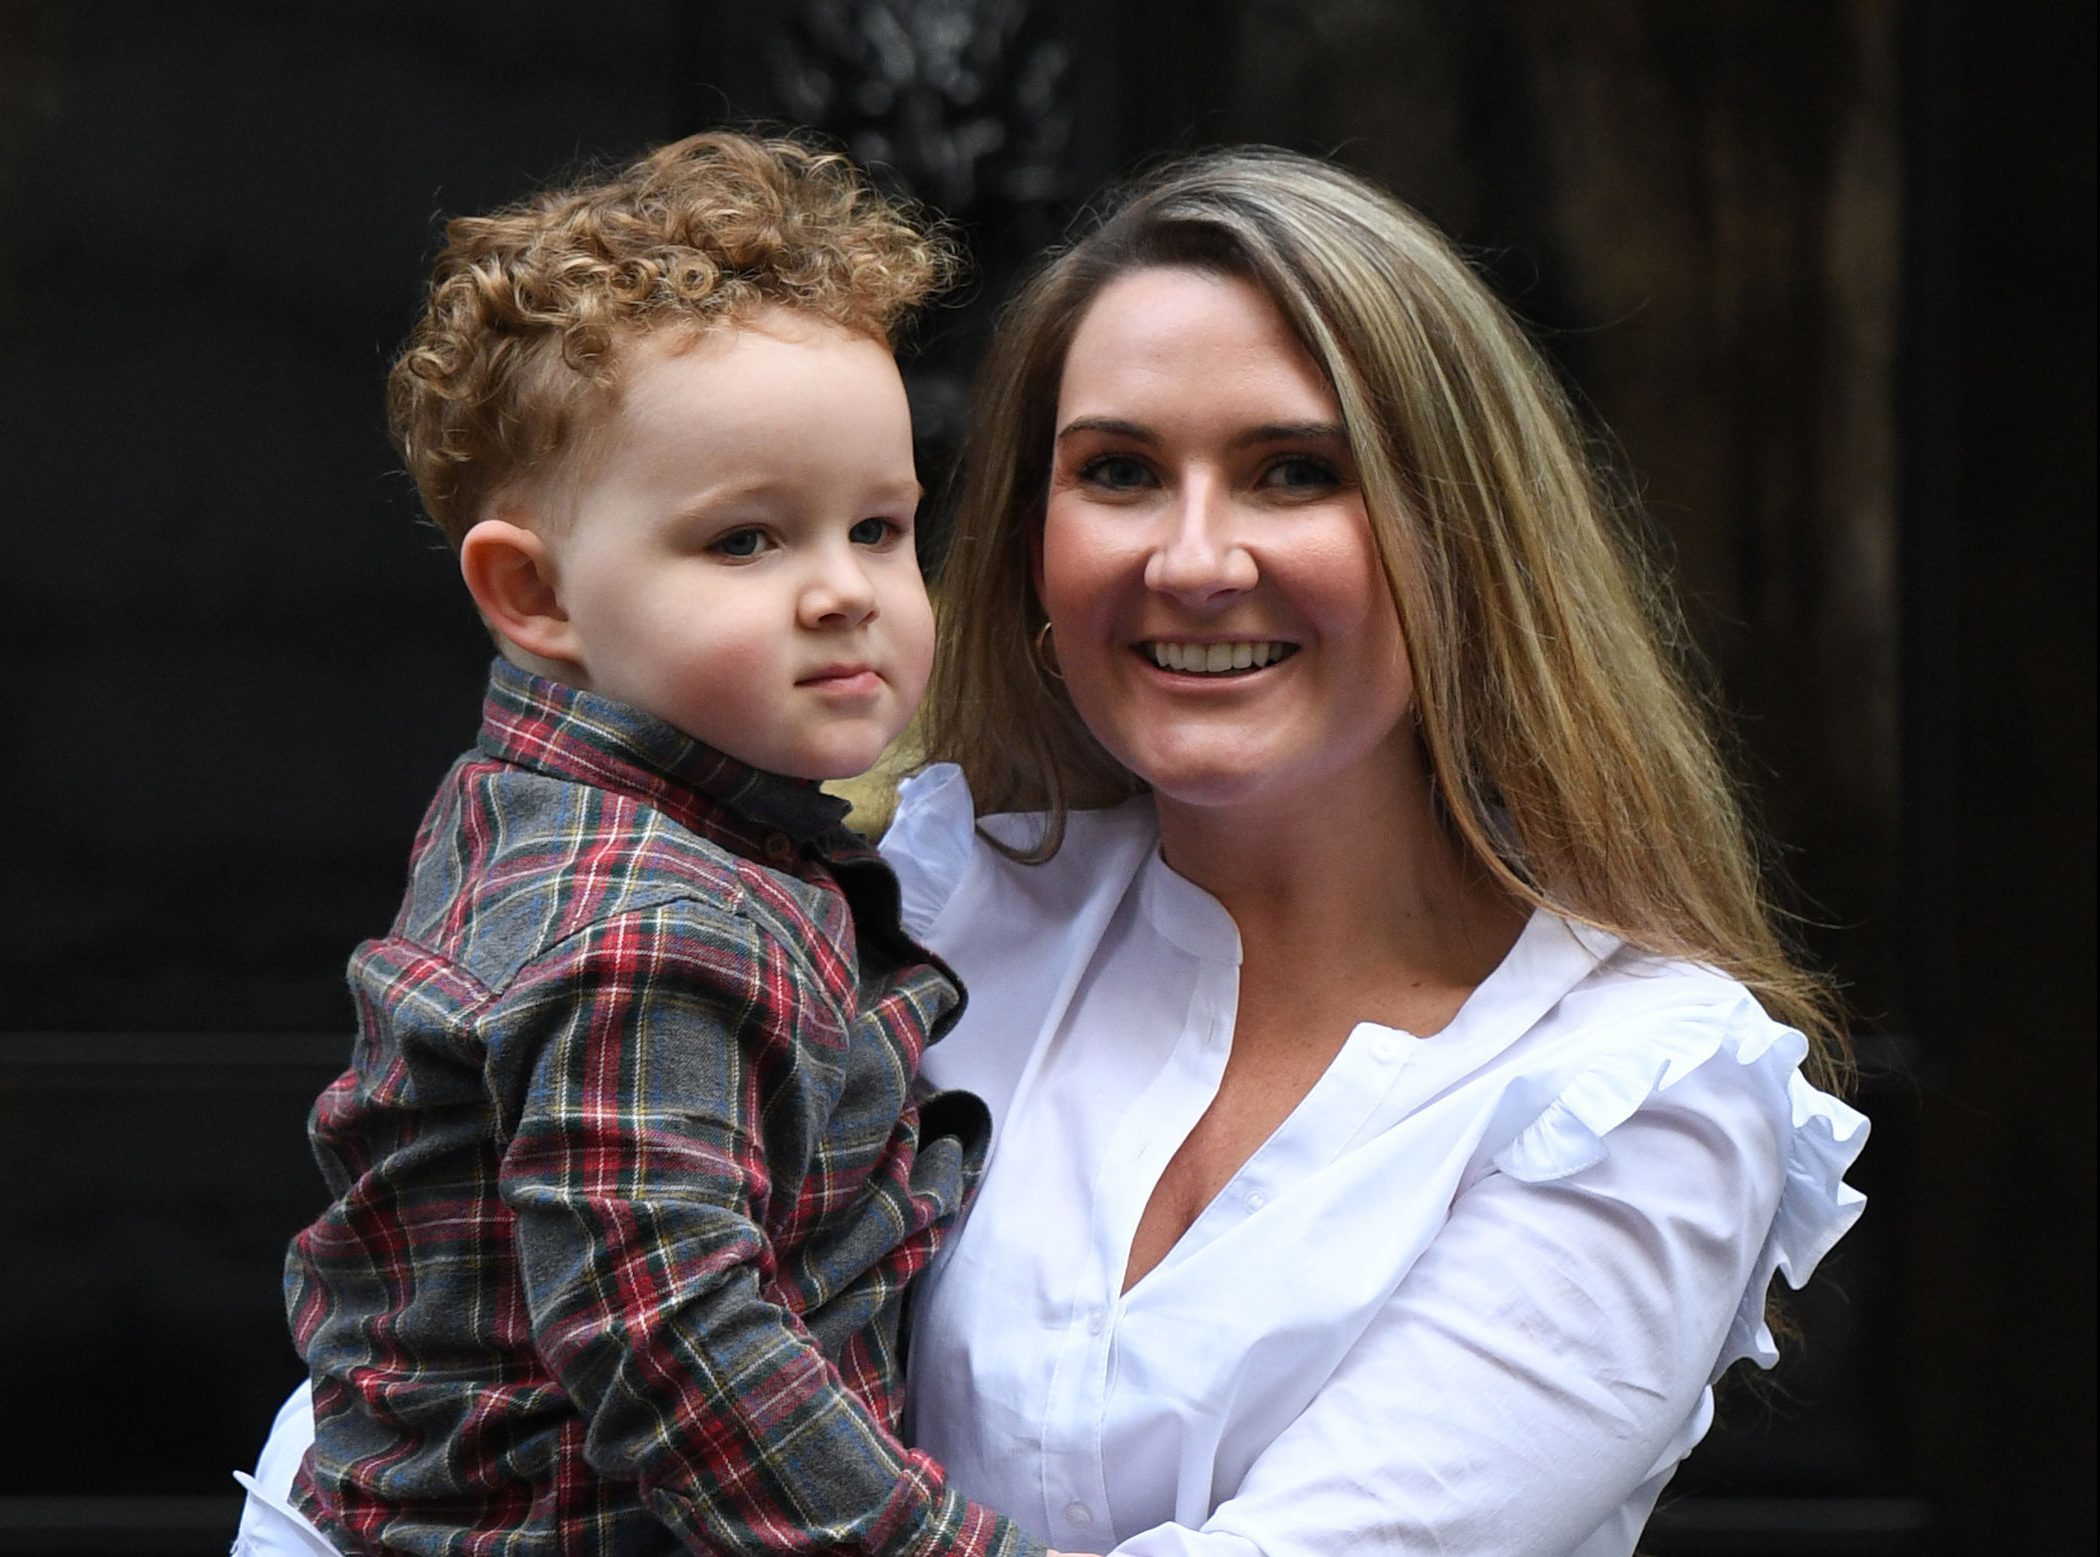 Yvonne MacHugh, fiance of Billy Irving and her two year old son, William deliver a petition to 10 Downing Street in London